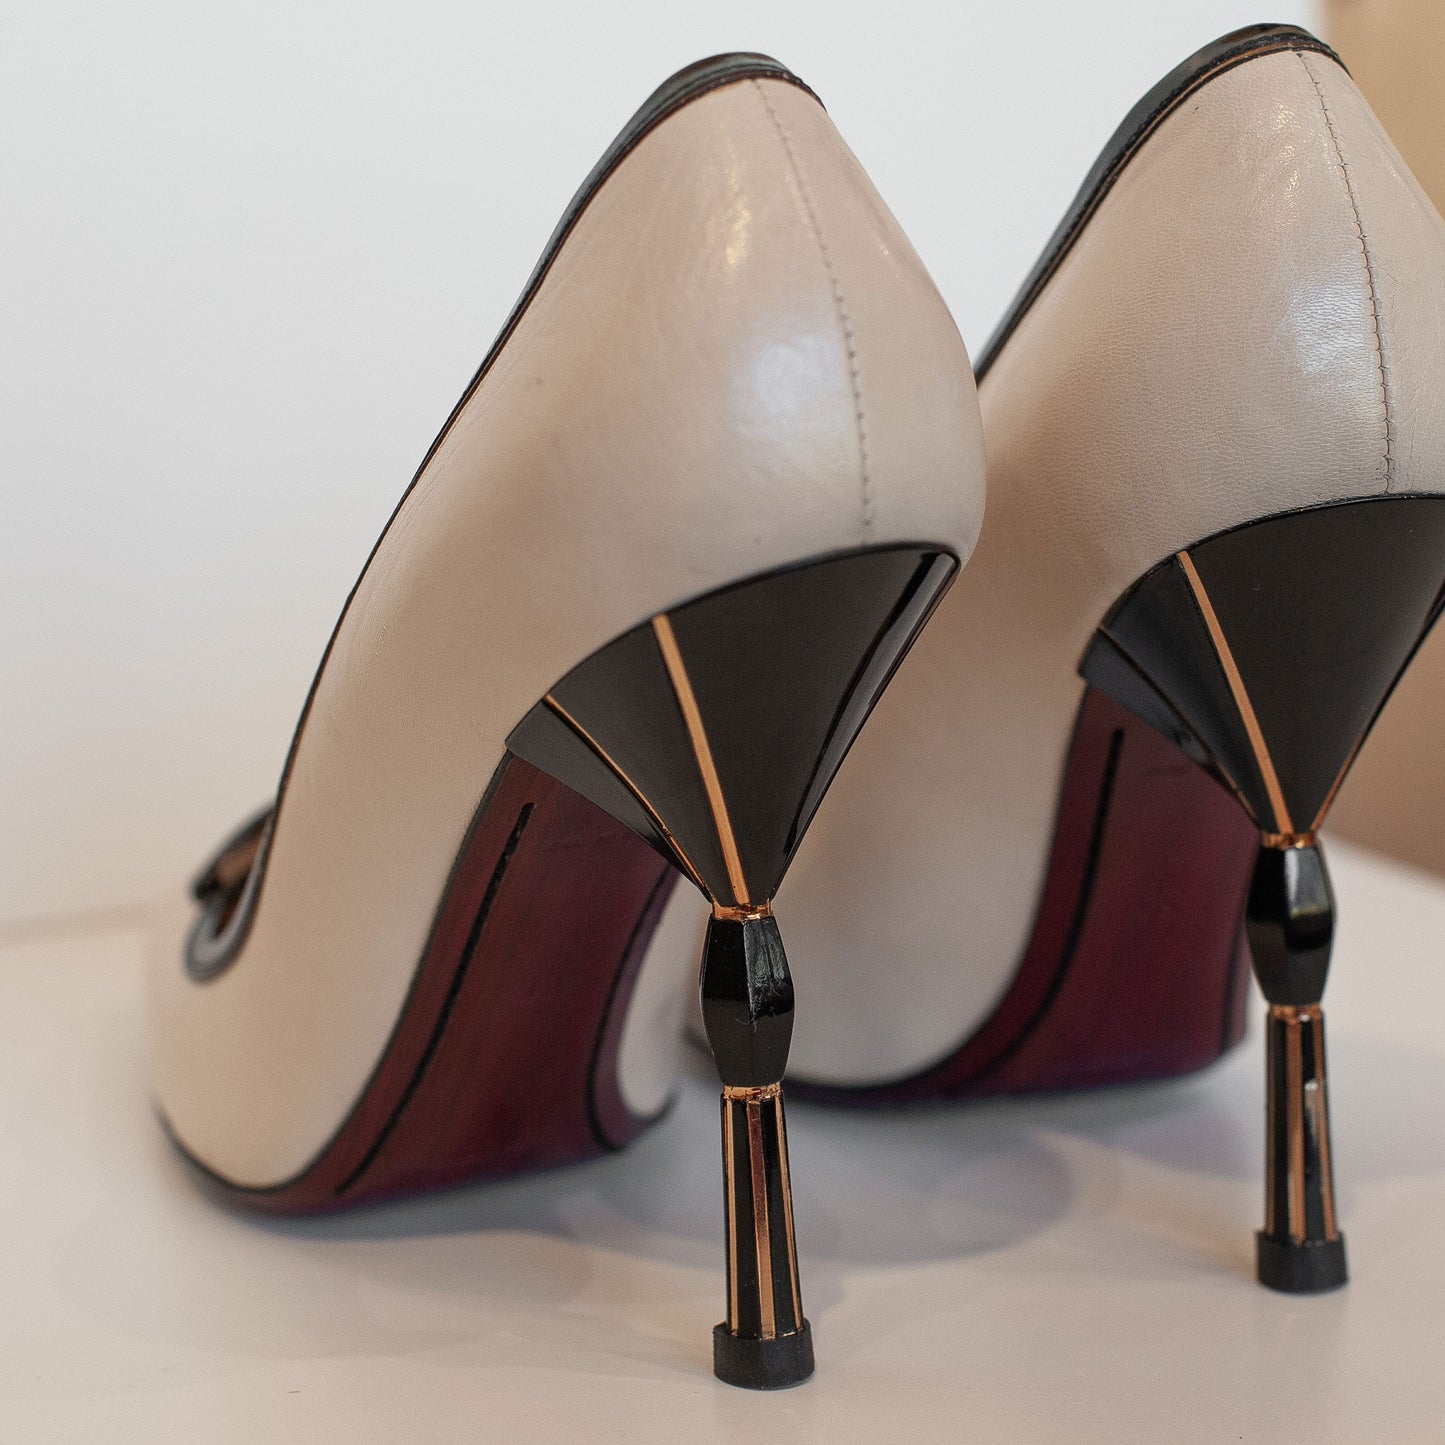 Louis Vuitton Limited Edition Art Deco Black, Ivory, and Gold Pumps